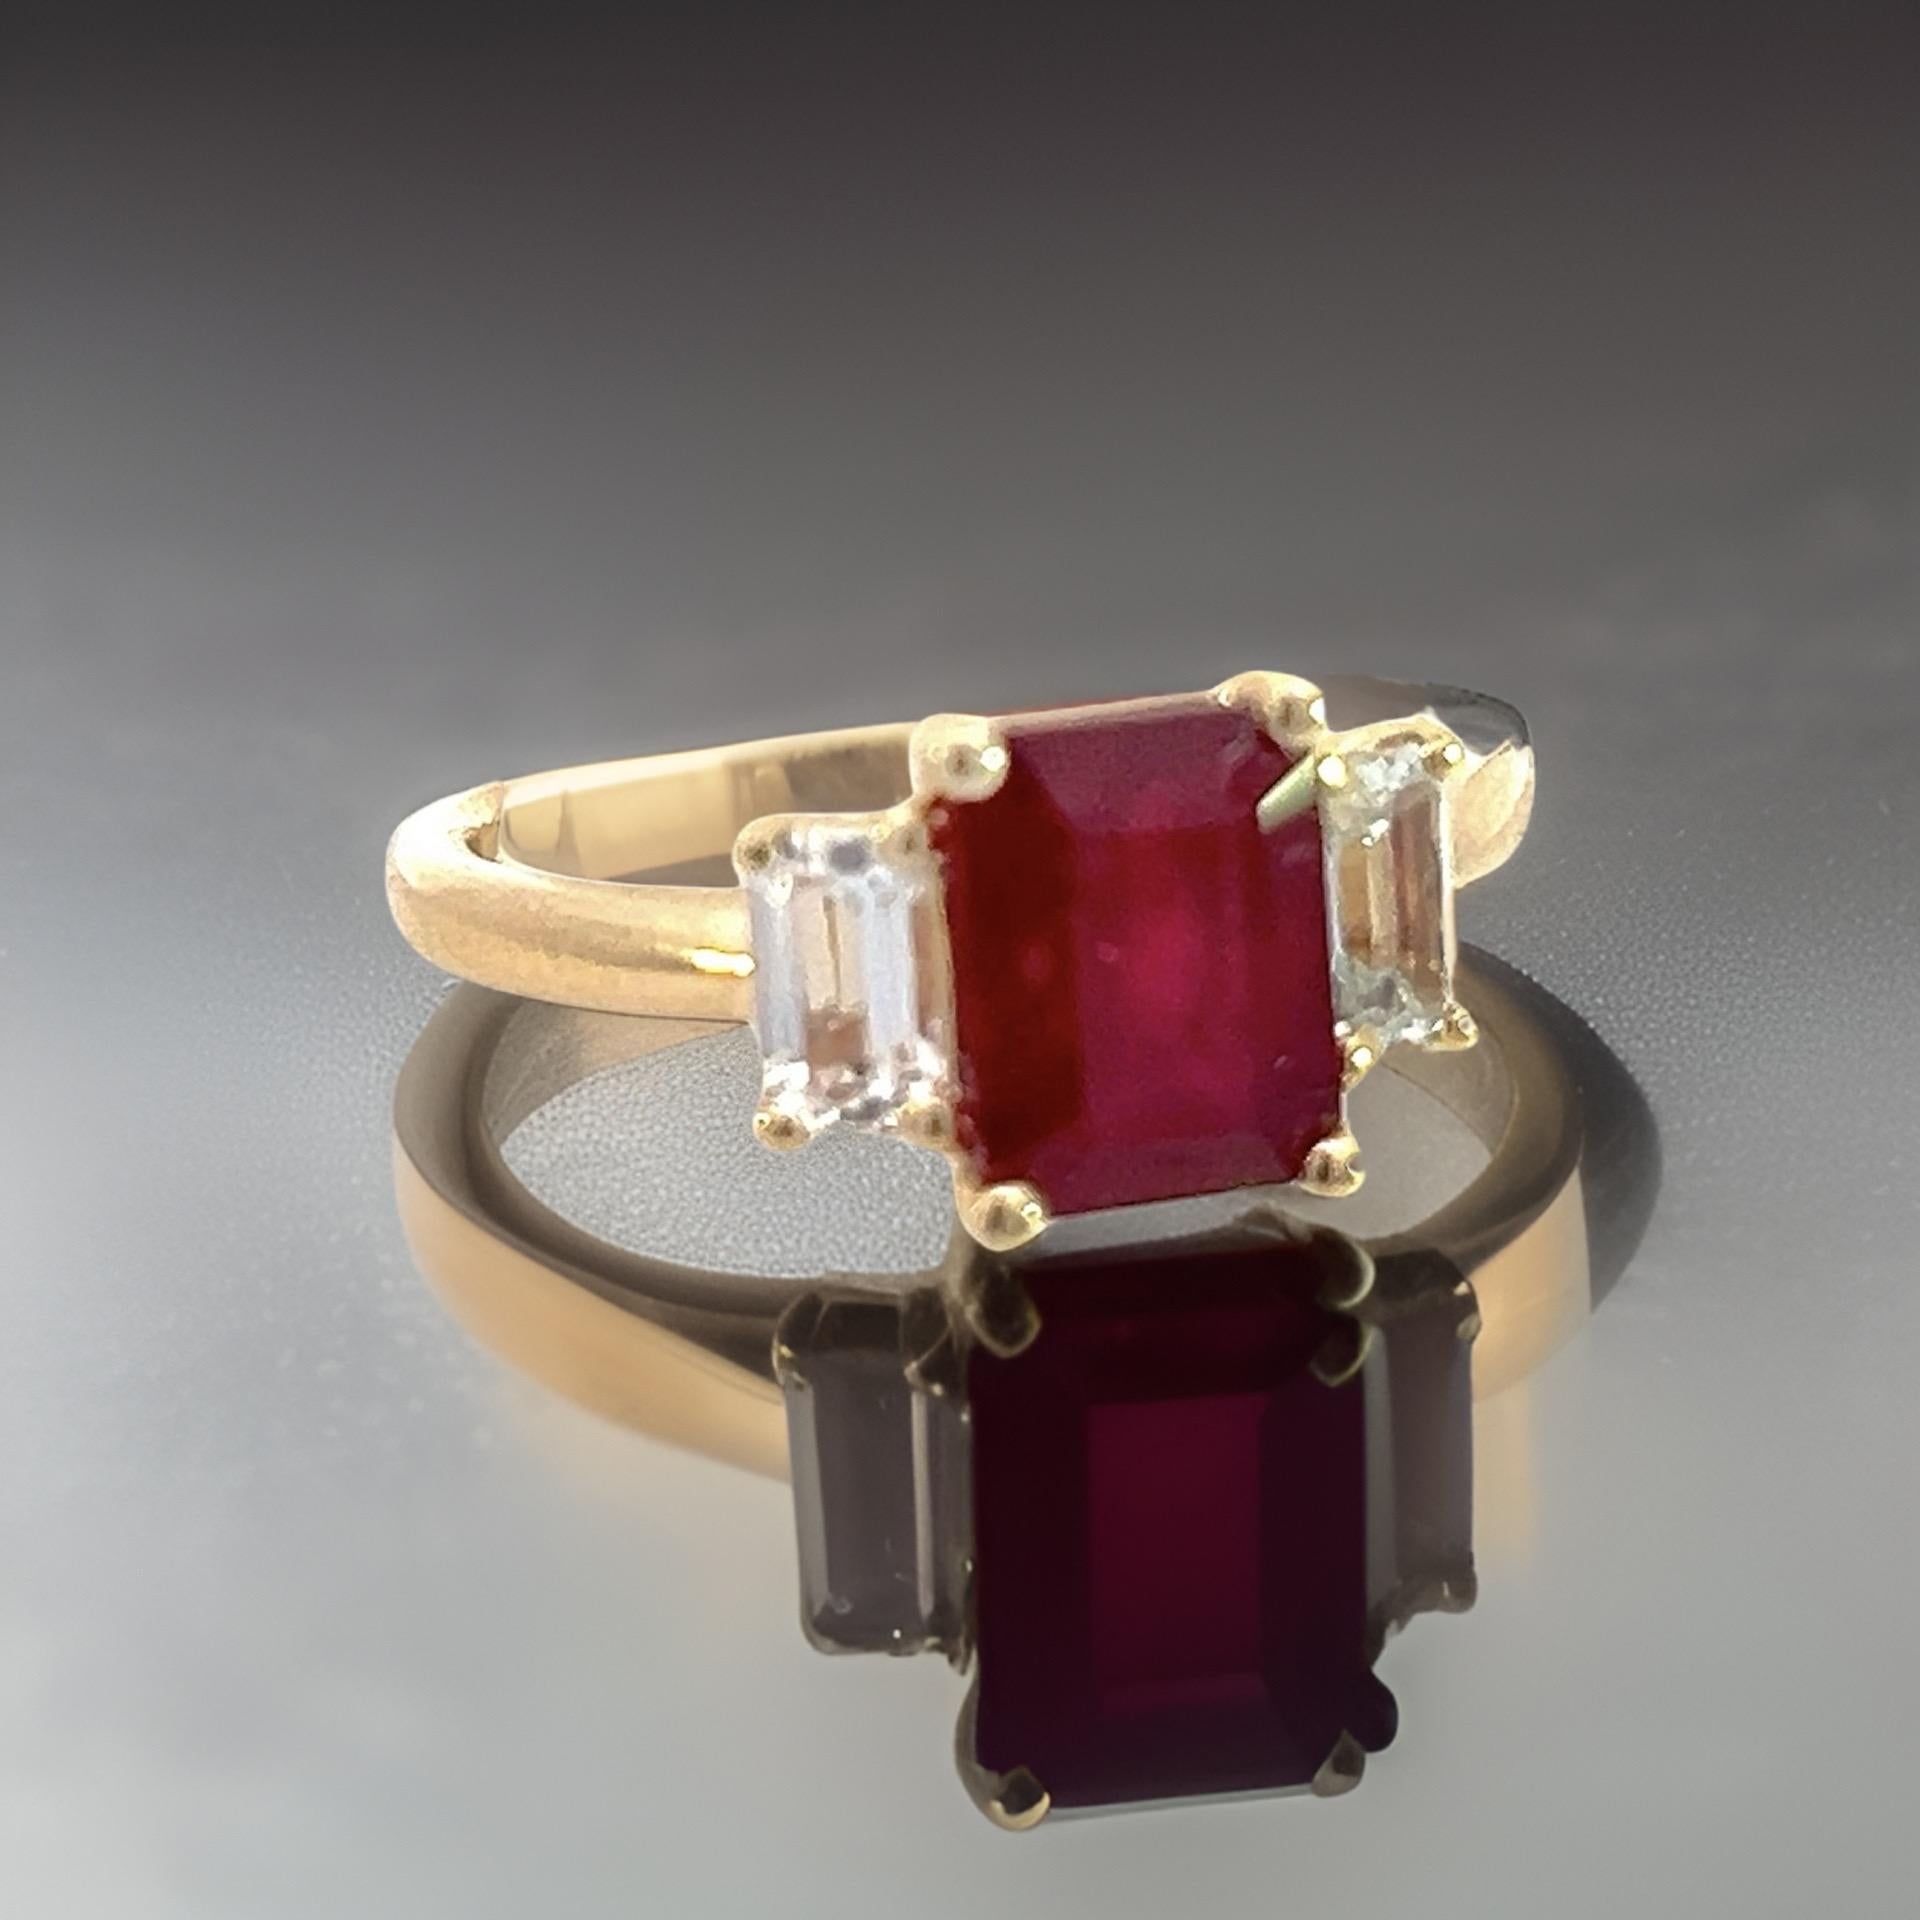 Natural Ruby Sapphire Ring 6.5 14k Y Gold 2.51 TCW Certified For Sale 4